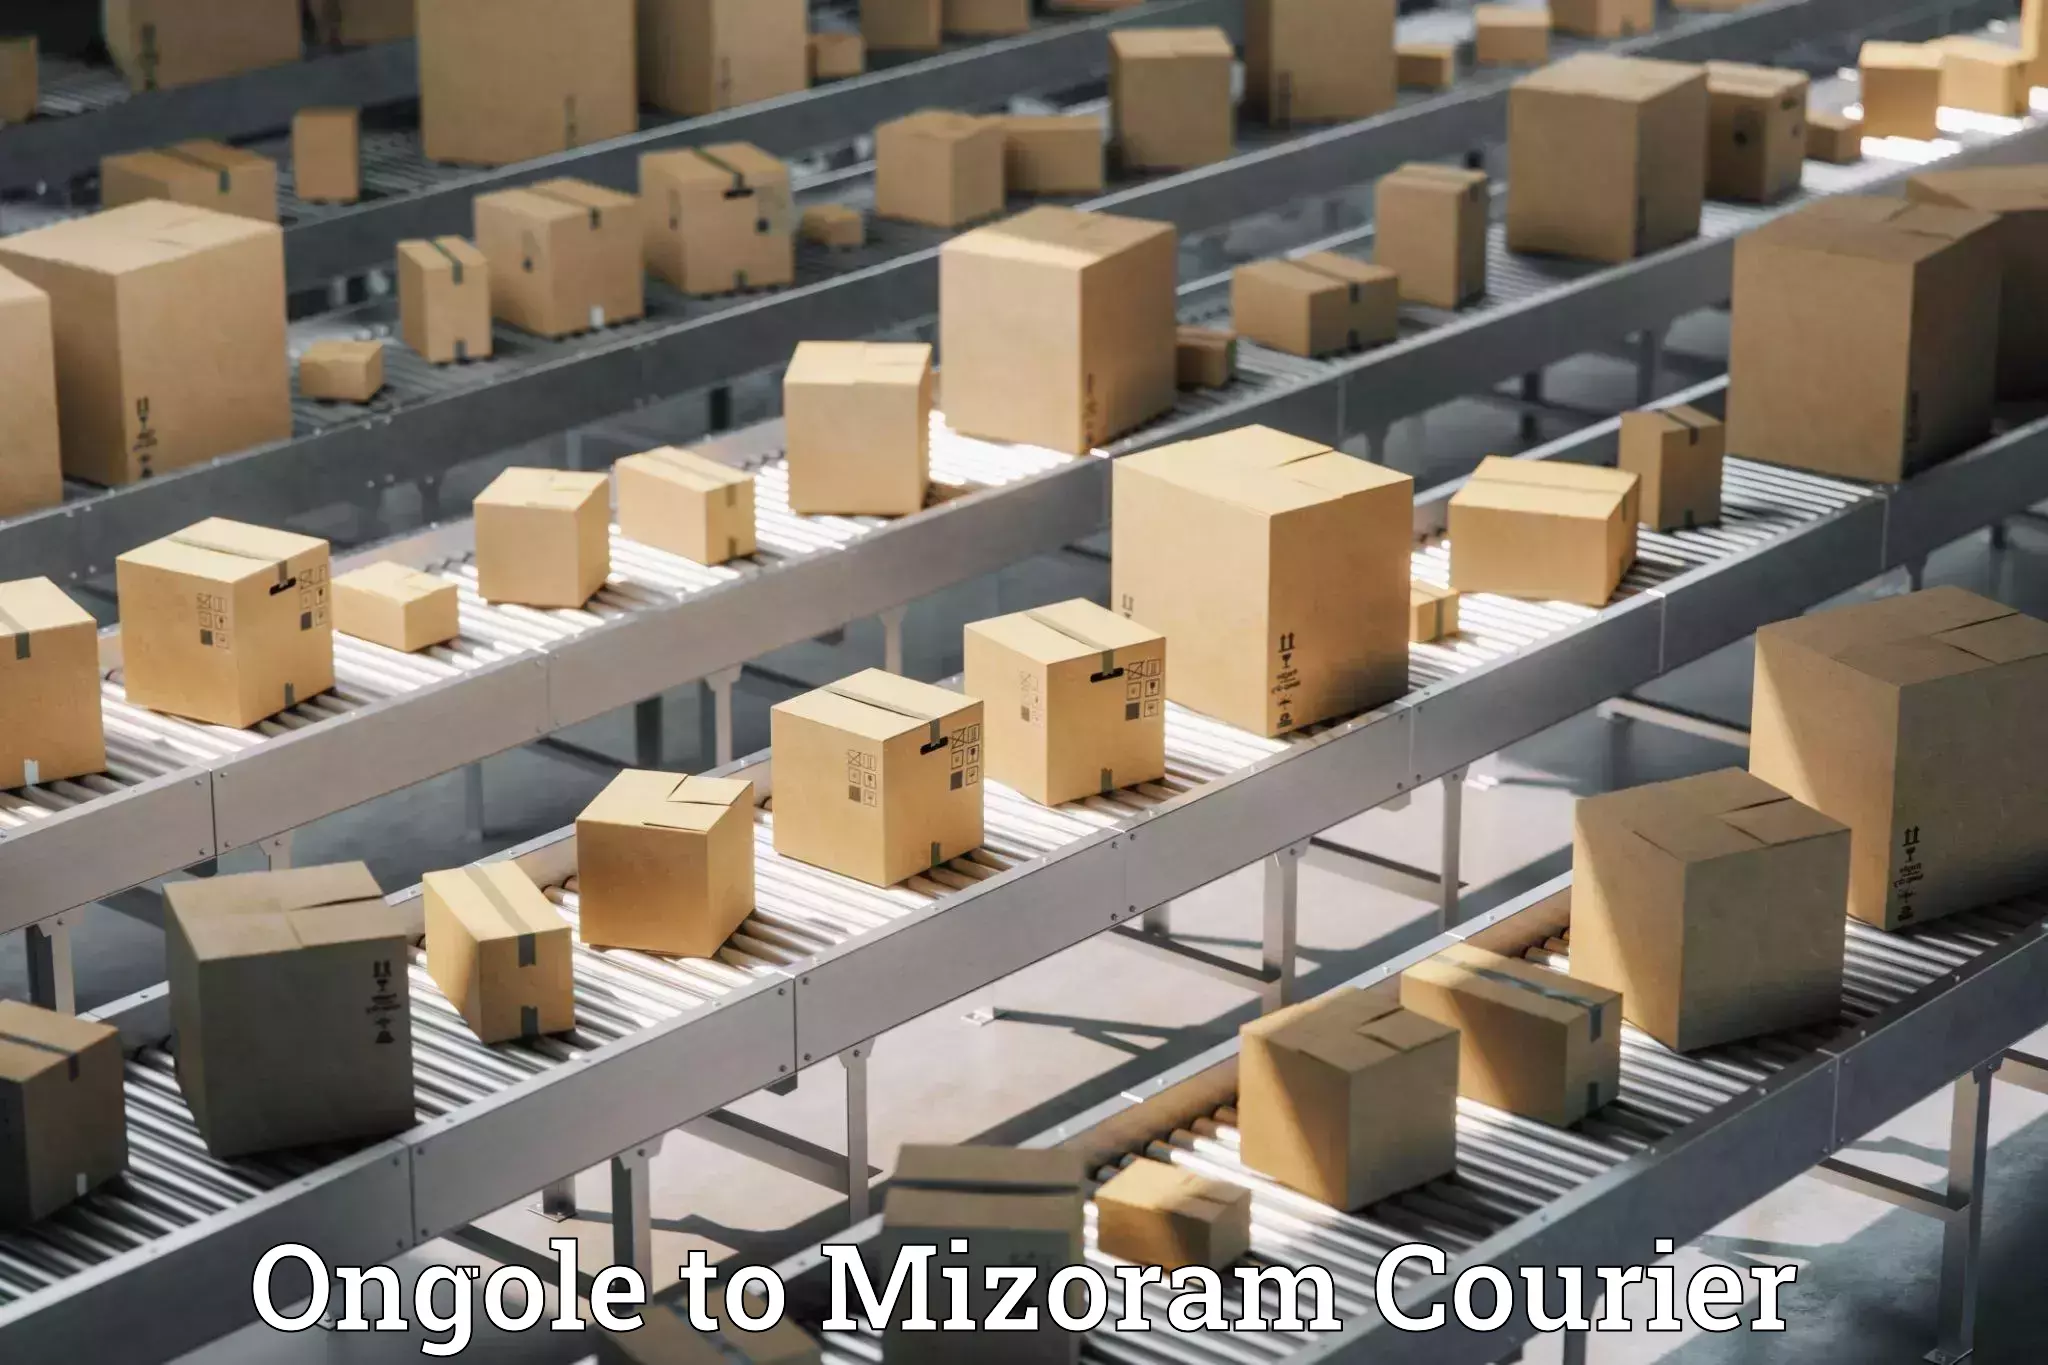 Express delivery network Ongole to Mizoram